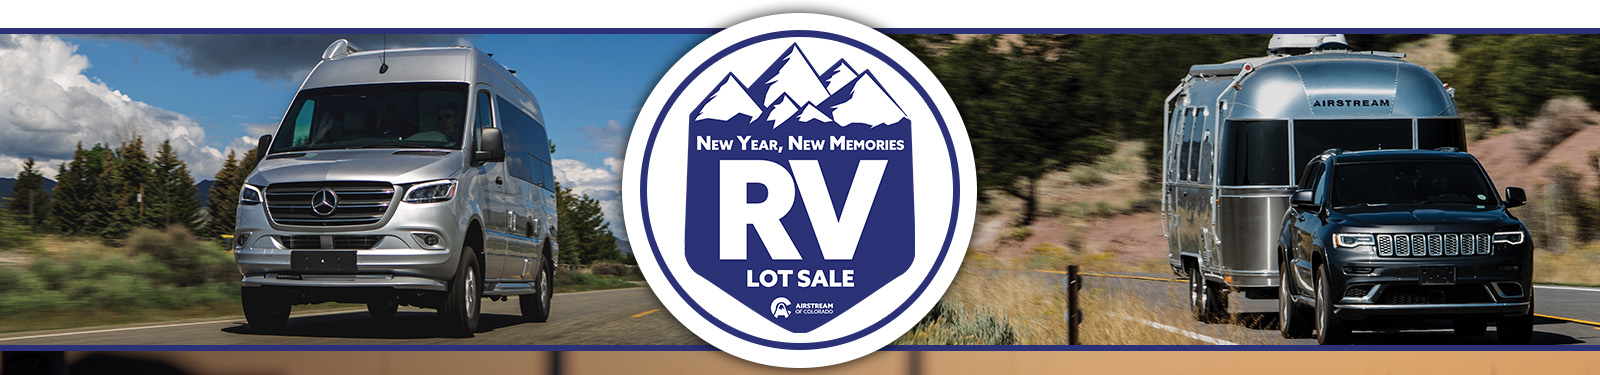 Airstream of Colorado RV Show-New Year, New Memories